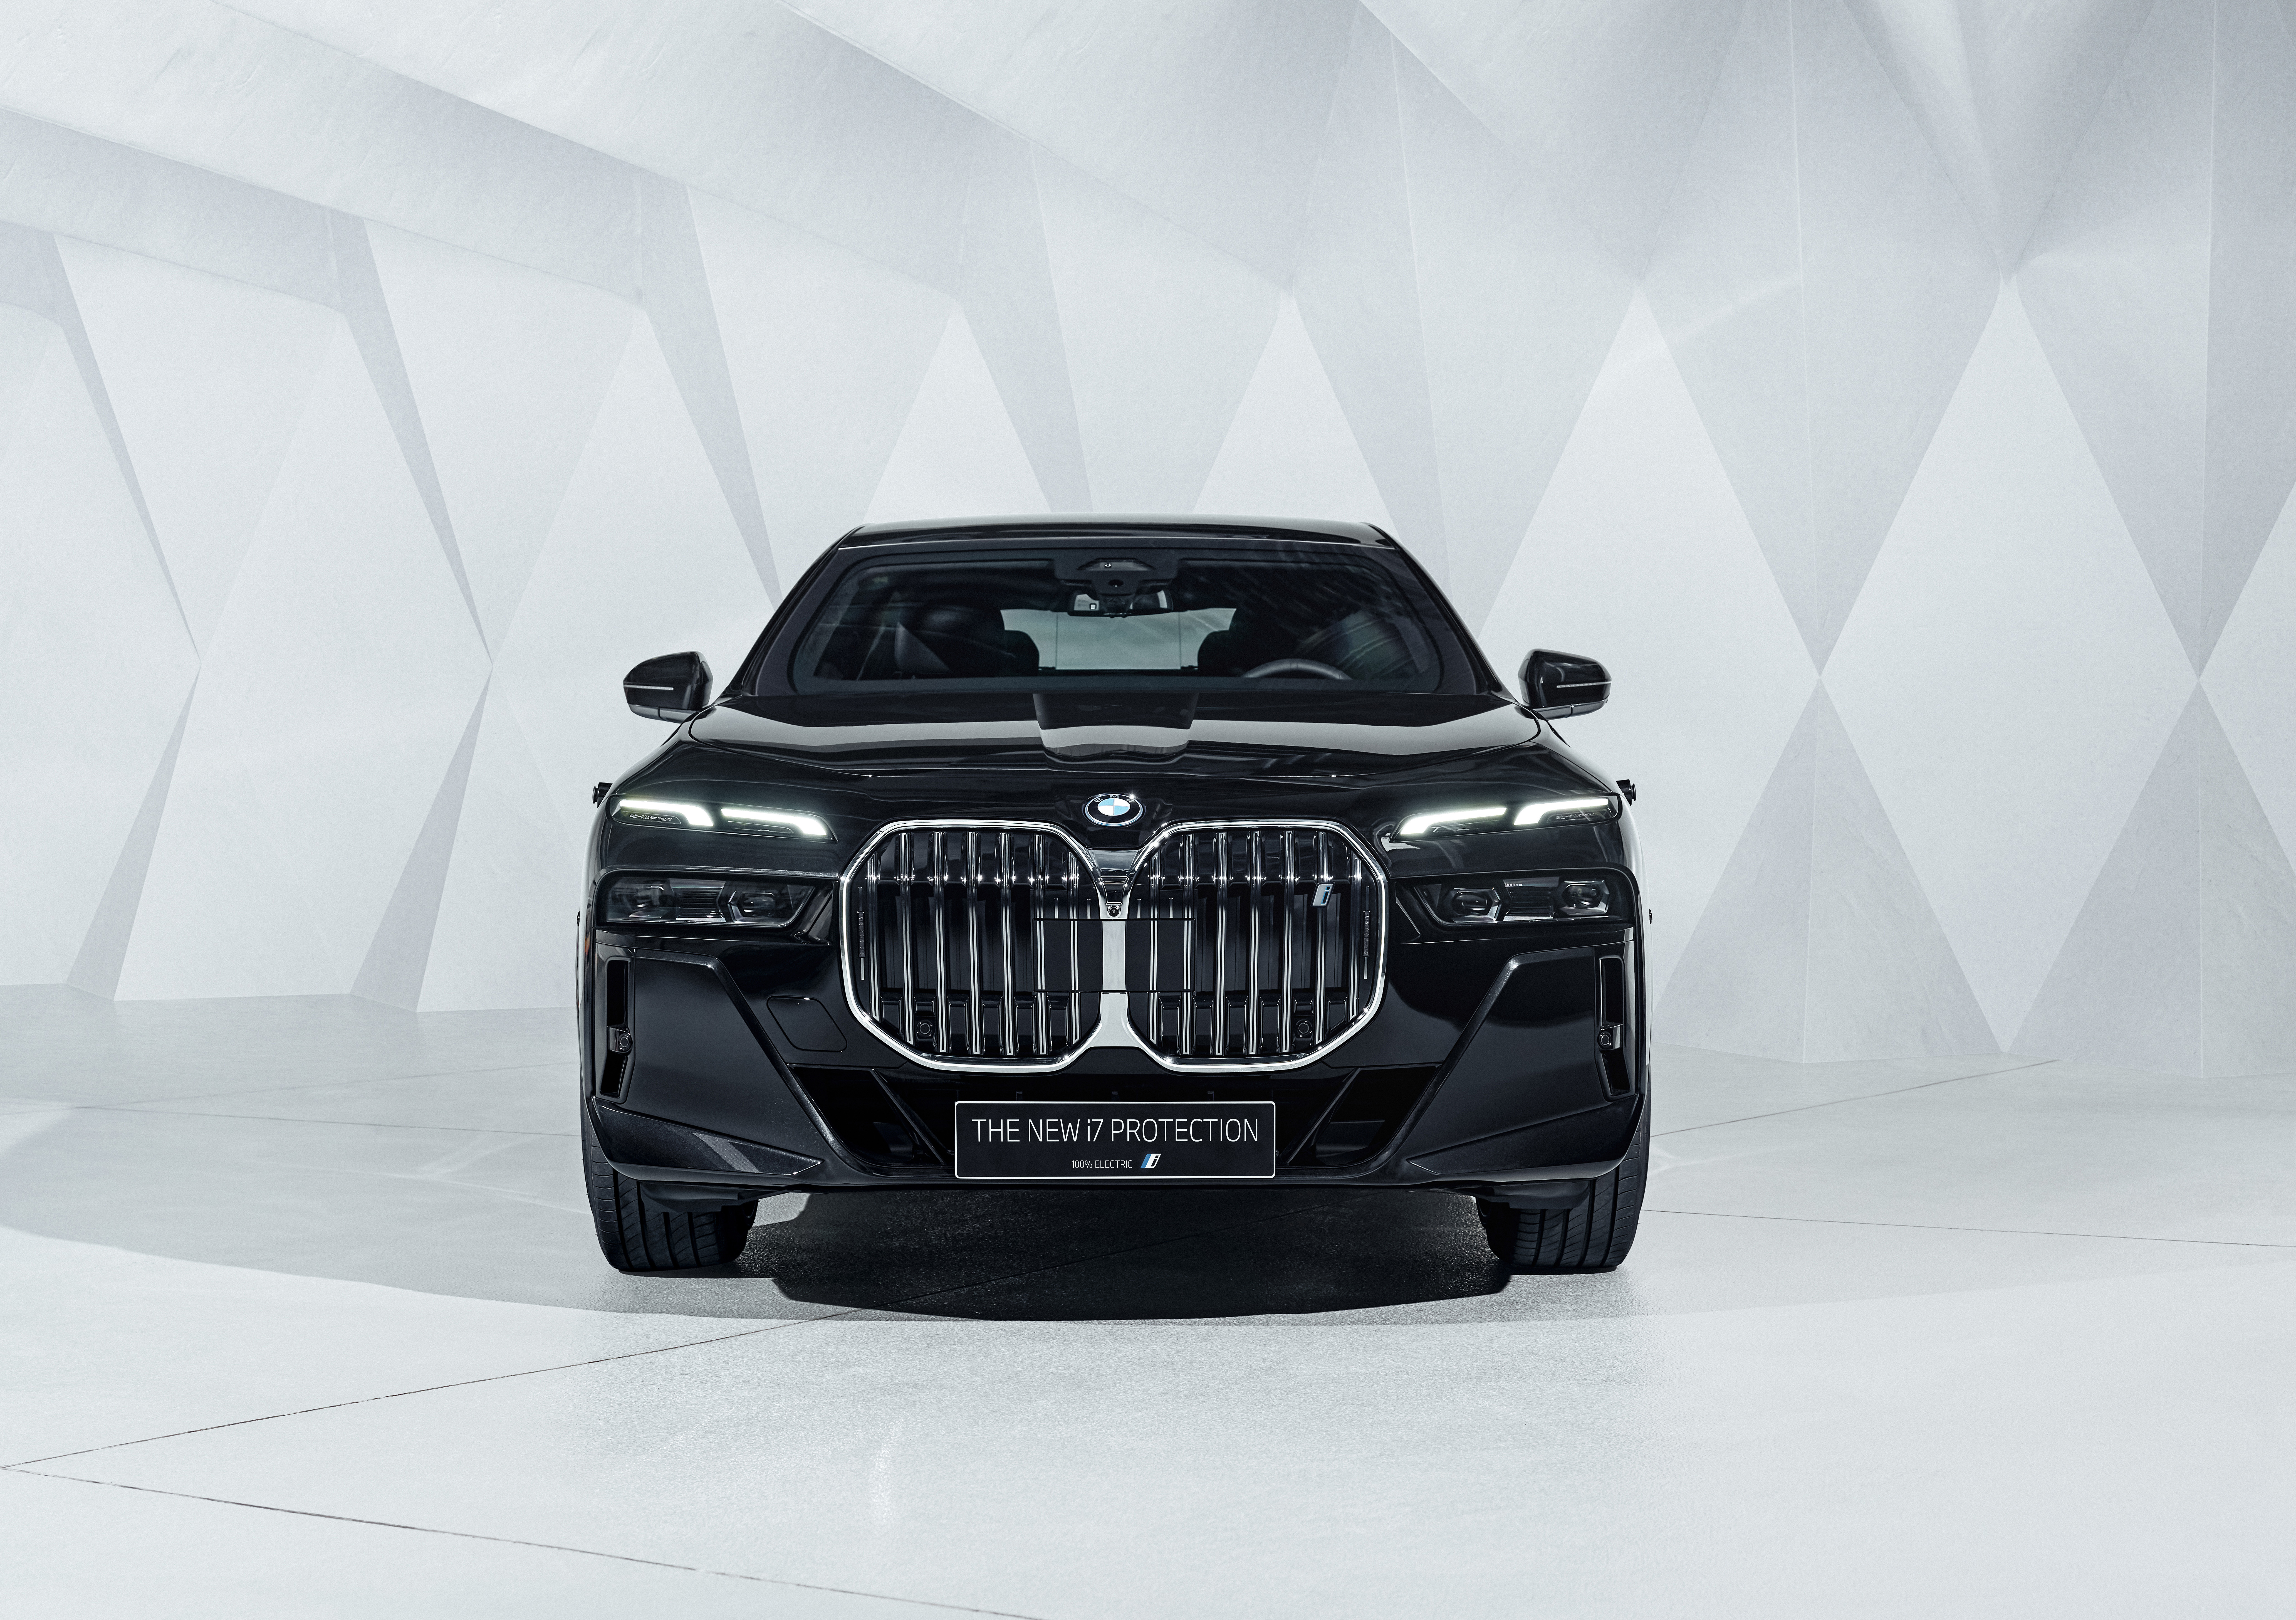 The first-ever BMW i7 Protection, the new BMW 7 Series Protection.